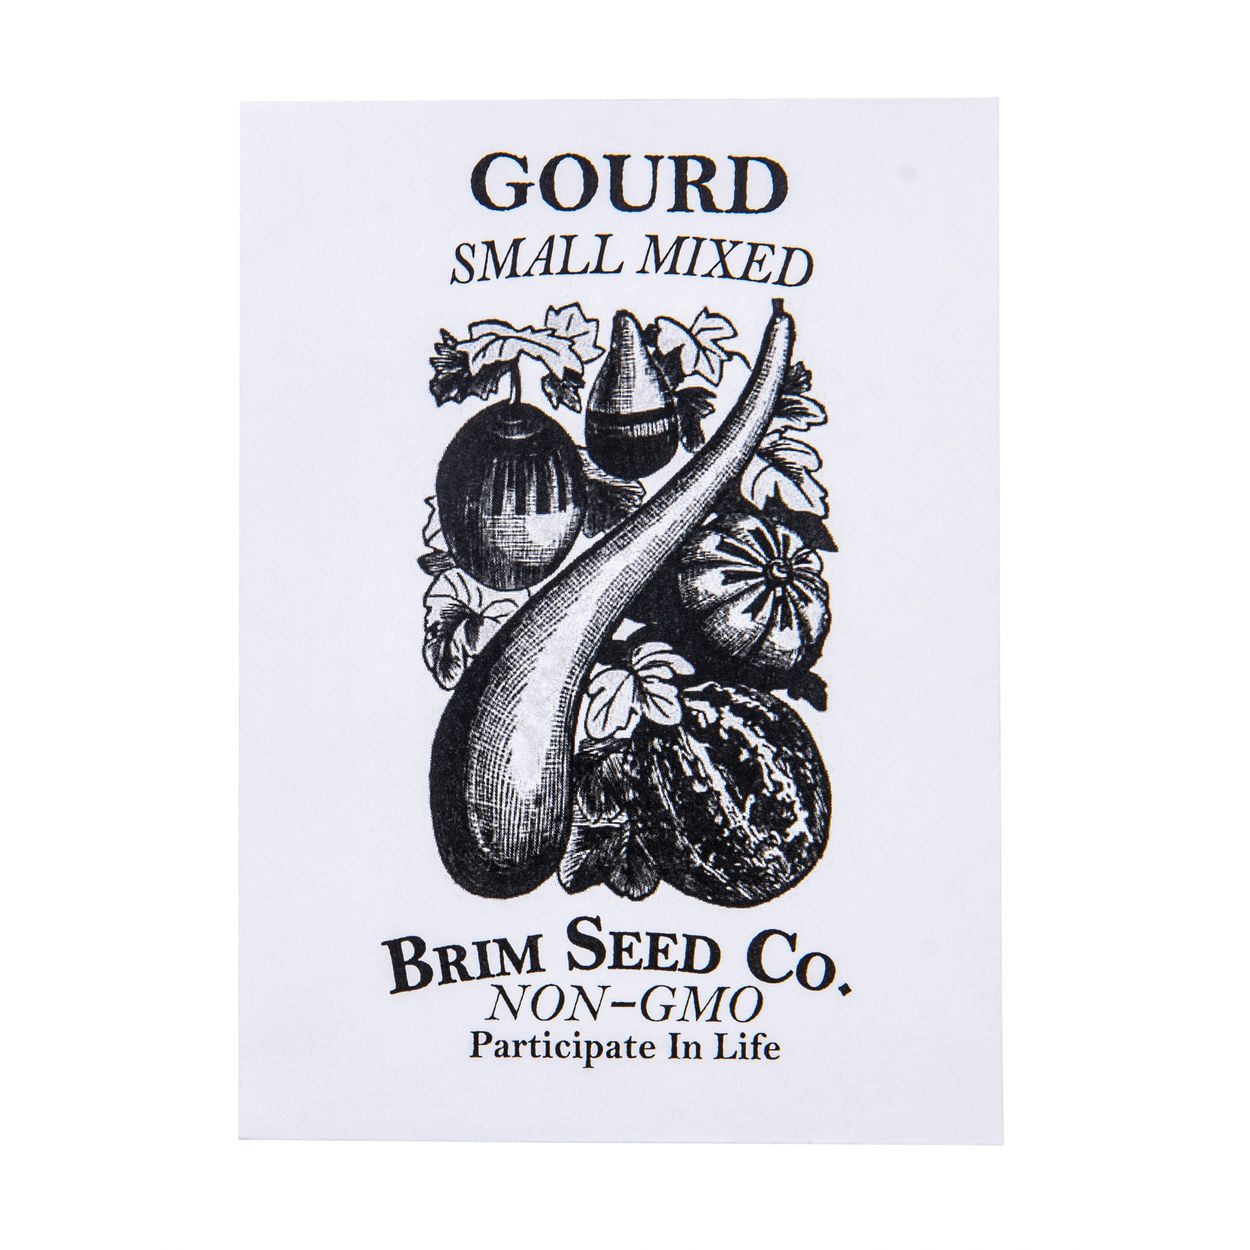 Brim Seed Co. - Small Mixed Gourd Seed